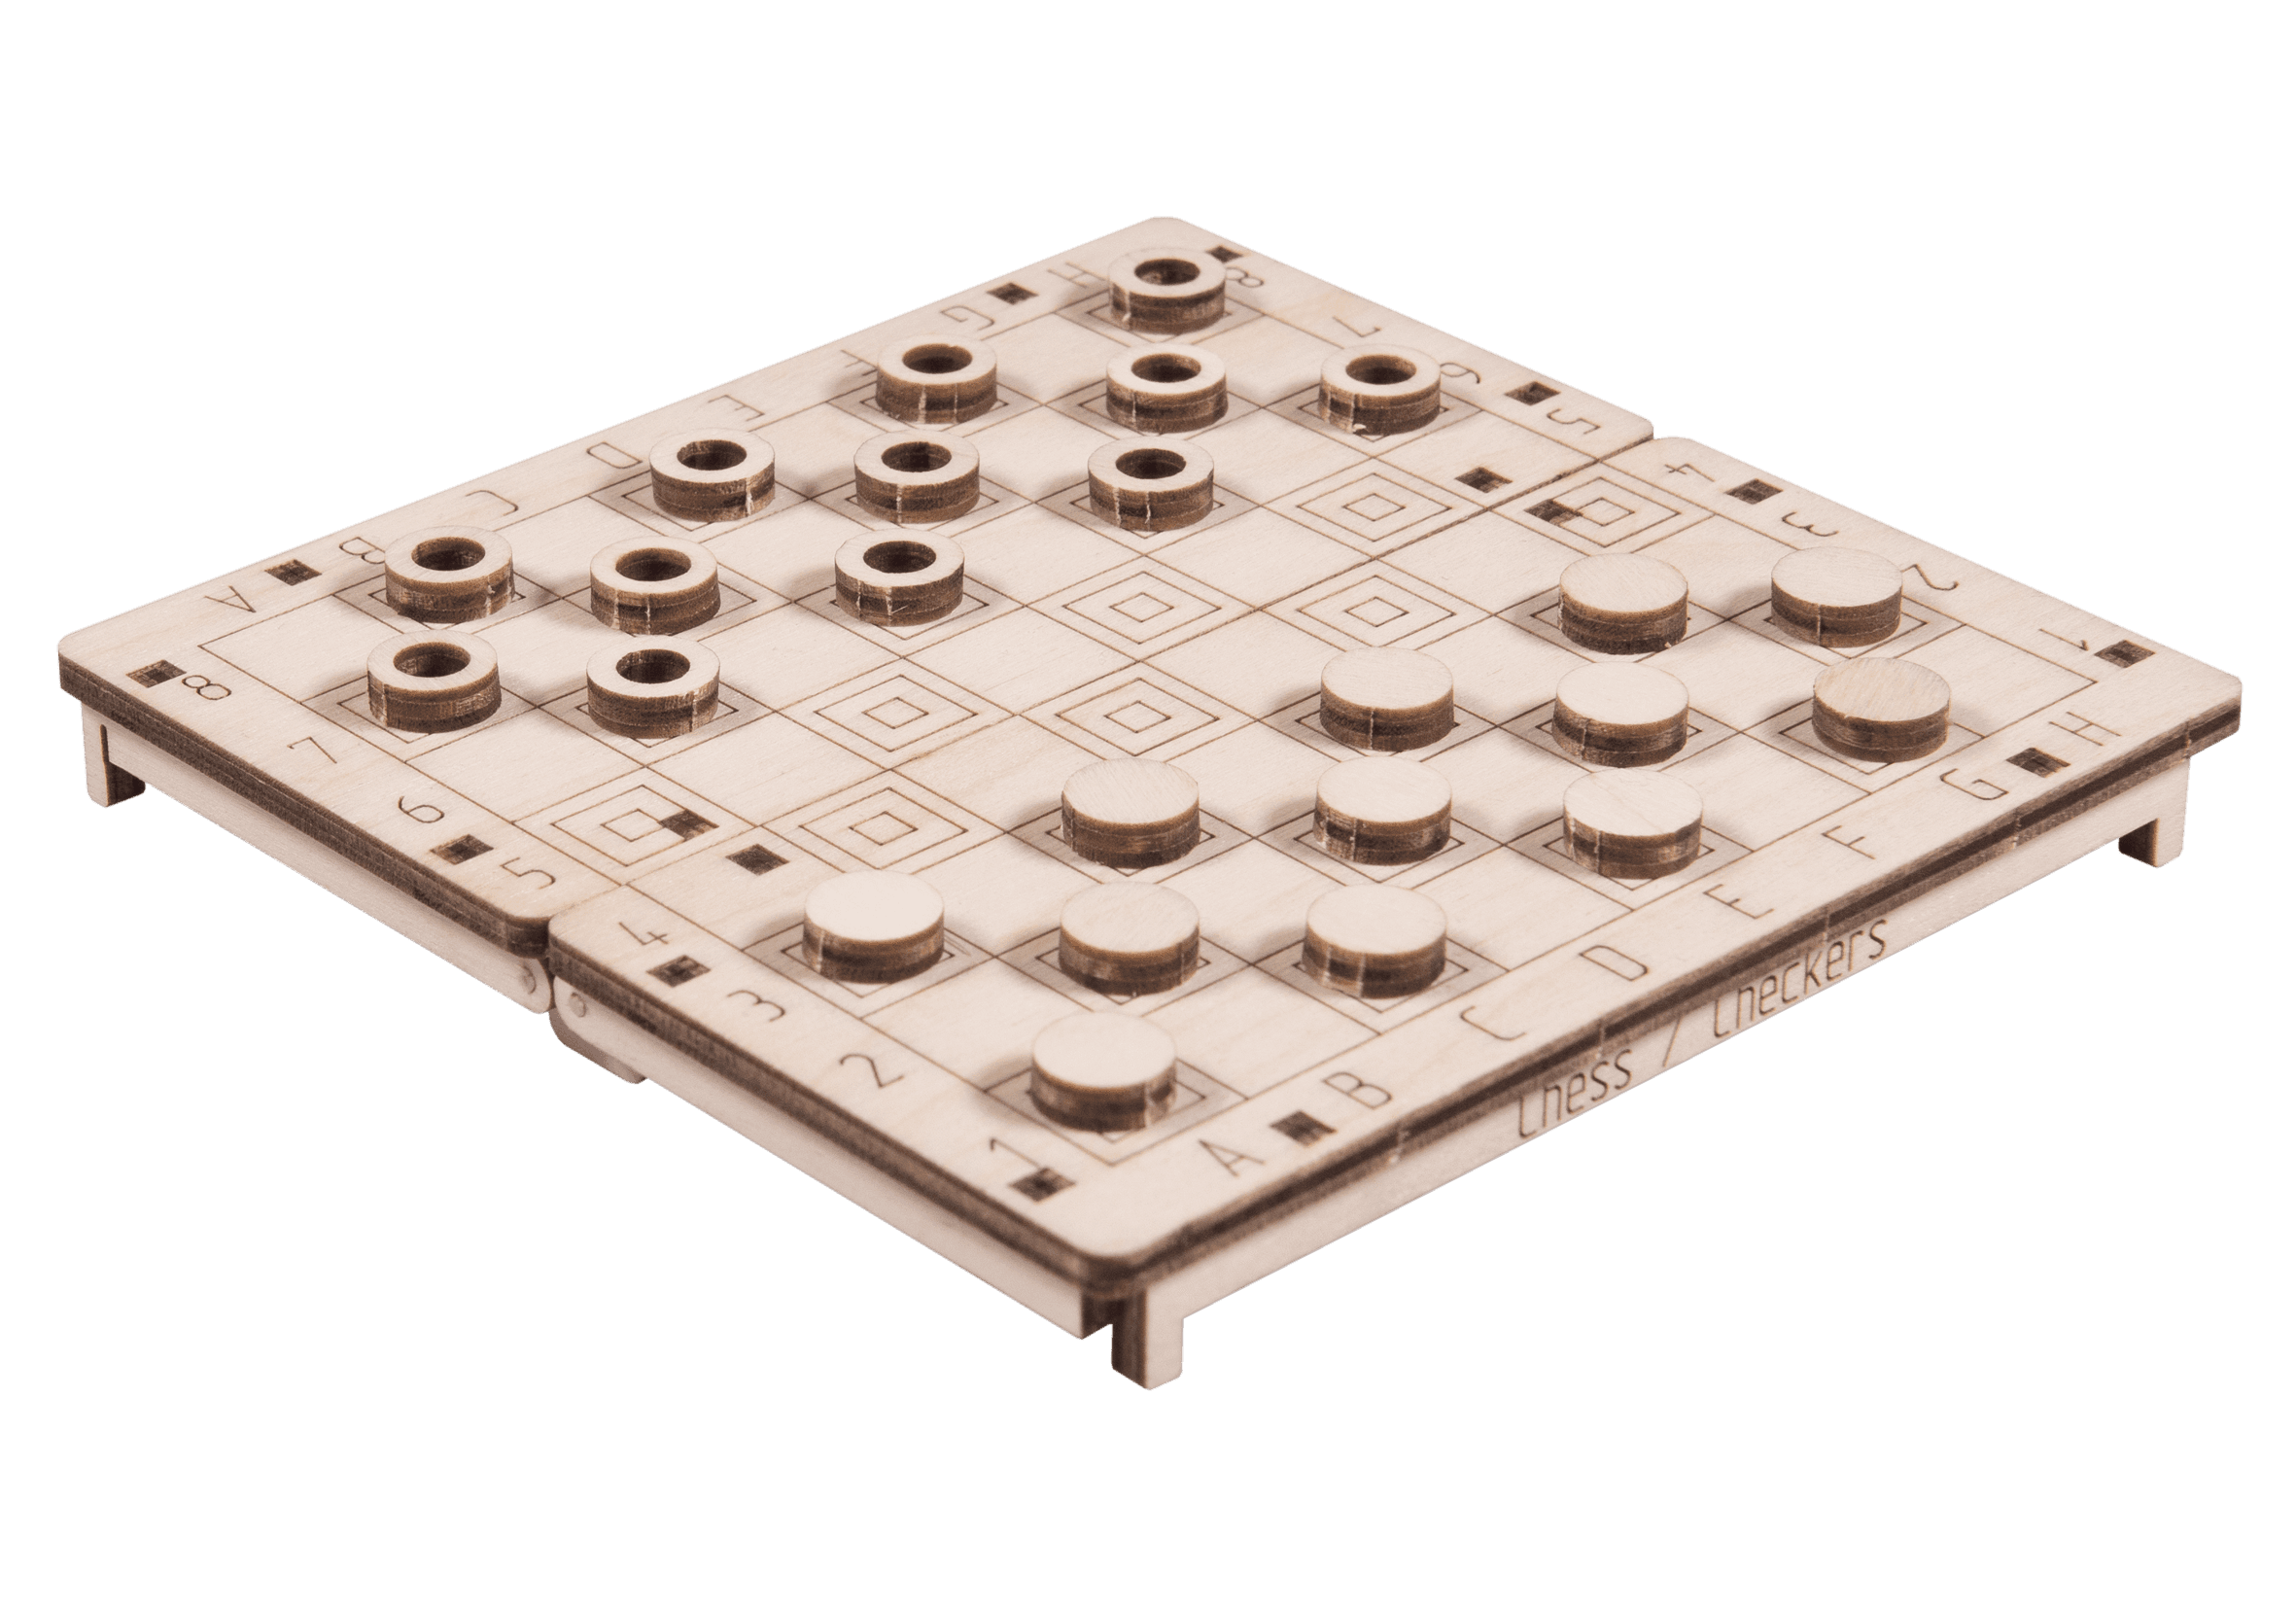 Wooden 3D Puzzle - Game of Chess and Checkers 2in1 made of wood